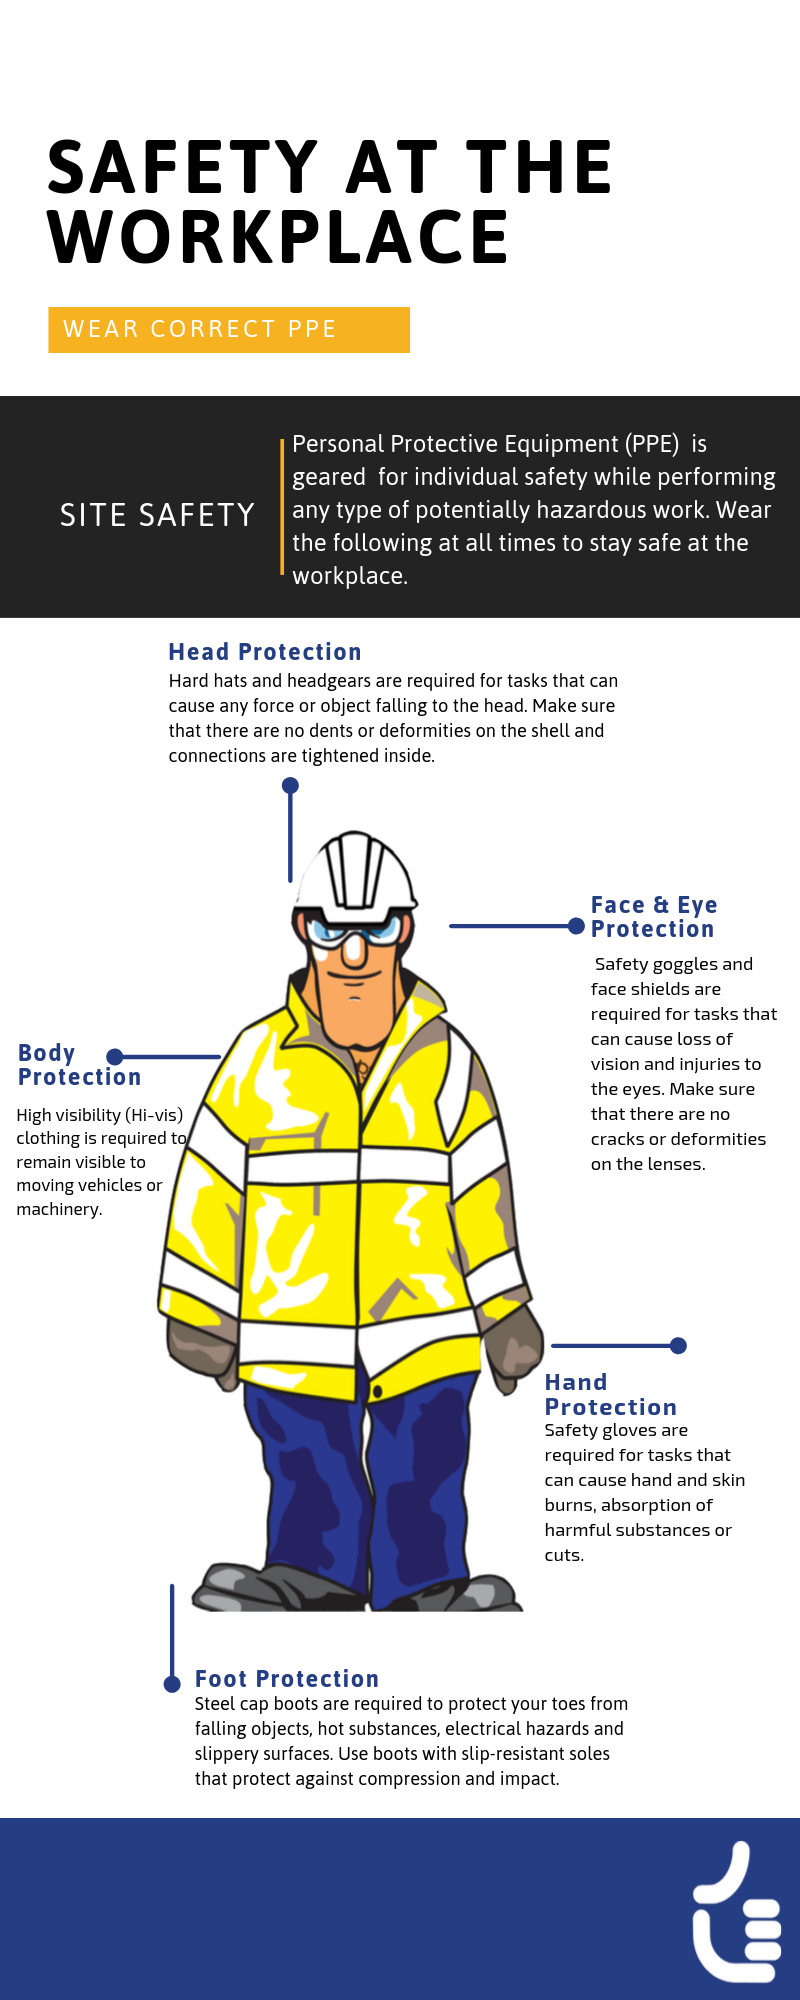 Personal Protective Equipment: How To Prevent Injuries At Work